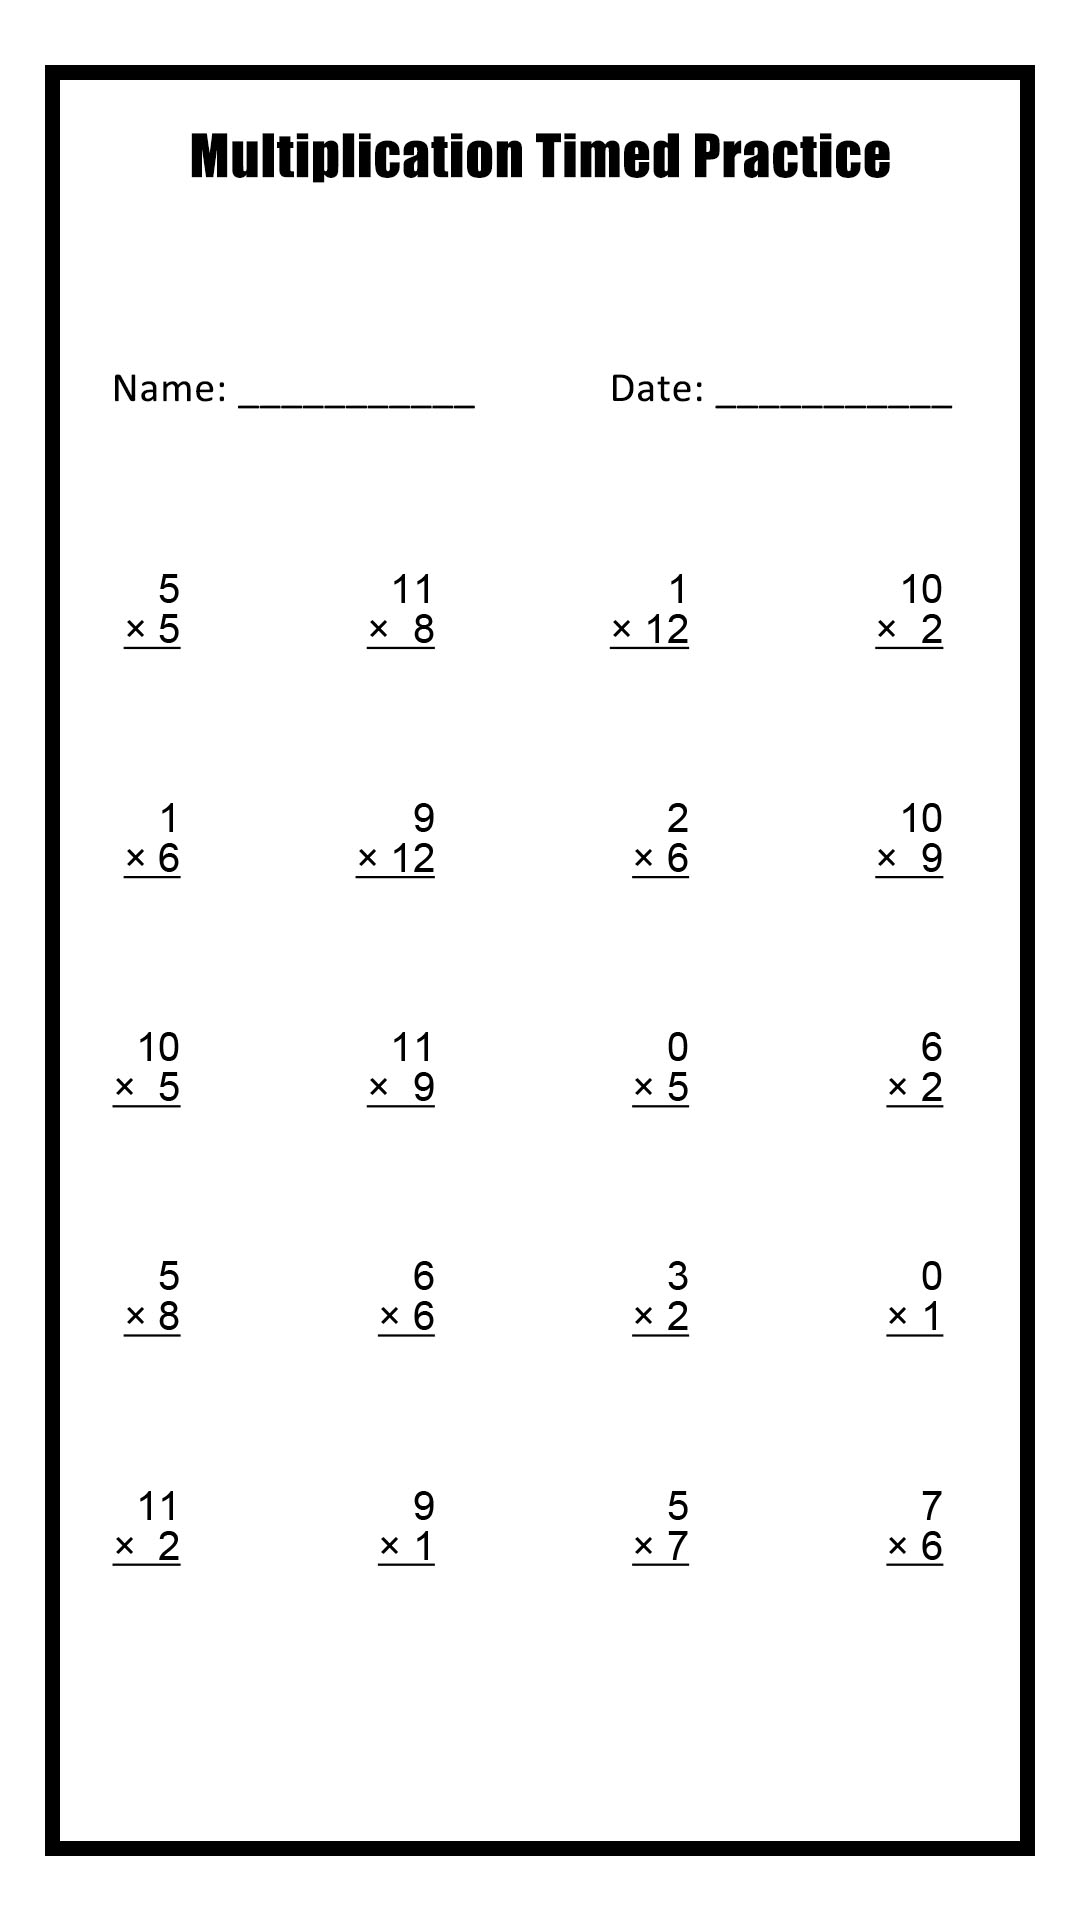 100 Multiplication Facts Timed Test Printable